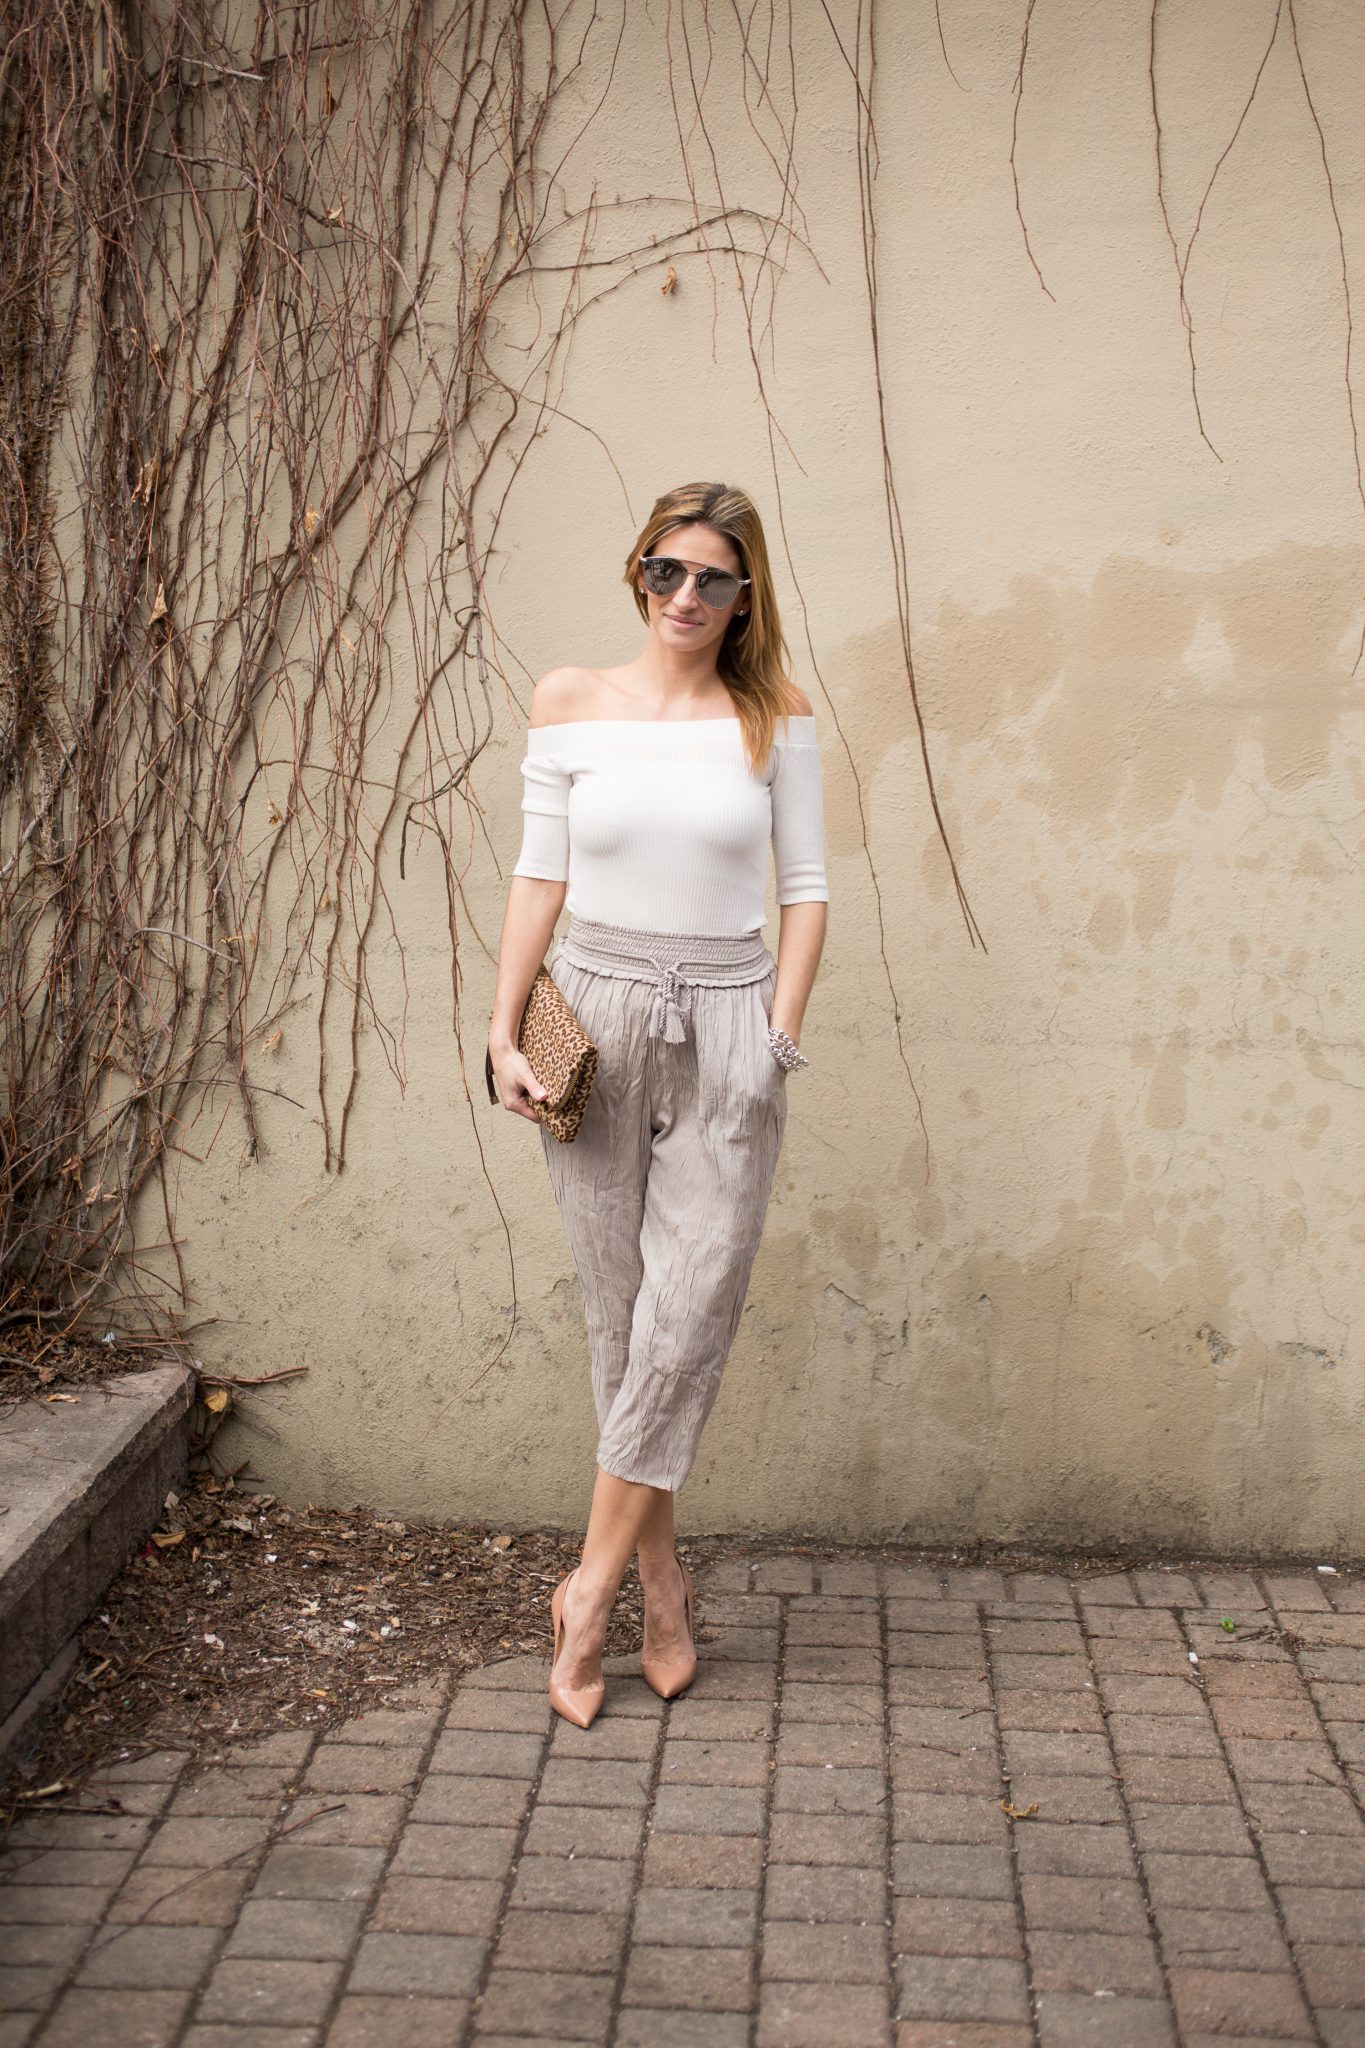 Lucky 7 Ribbed Off the Shoulder Top Jean Machine, Wilfred Nanterre pants from Aritzia, Nude Christian Louboutin pumps, Dior So Real Sunglasses, leopard print clutch from Charming Charlie